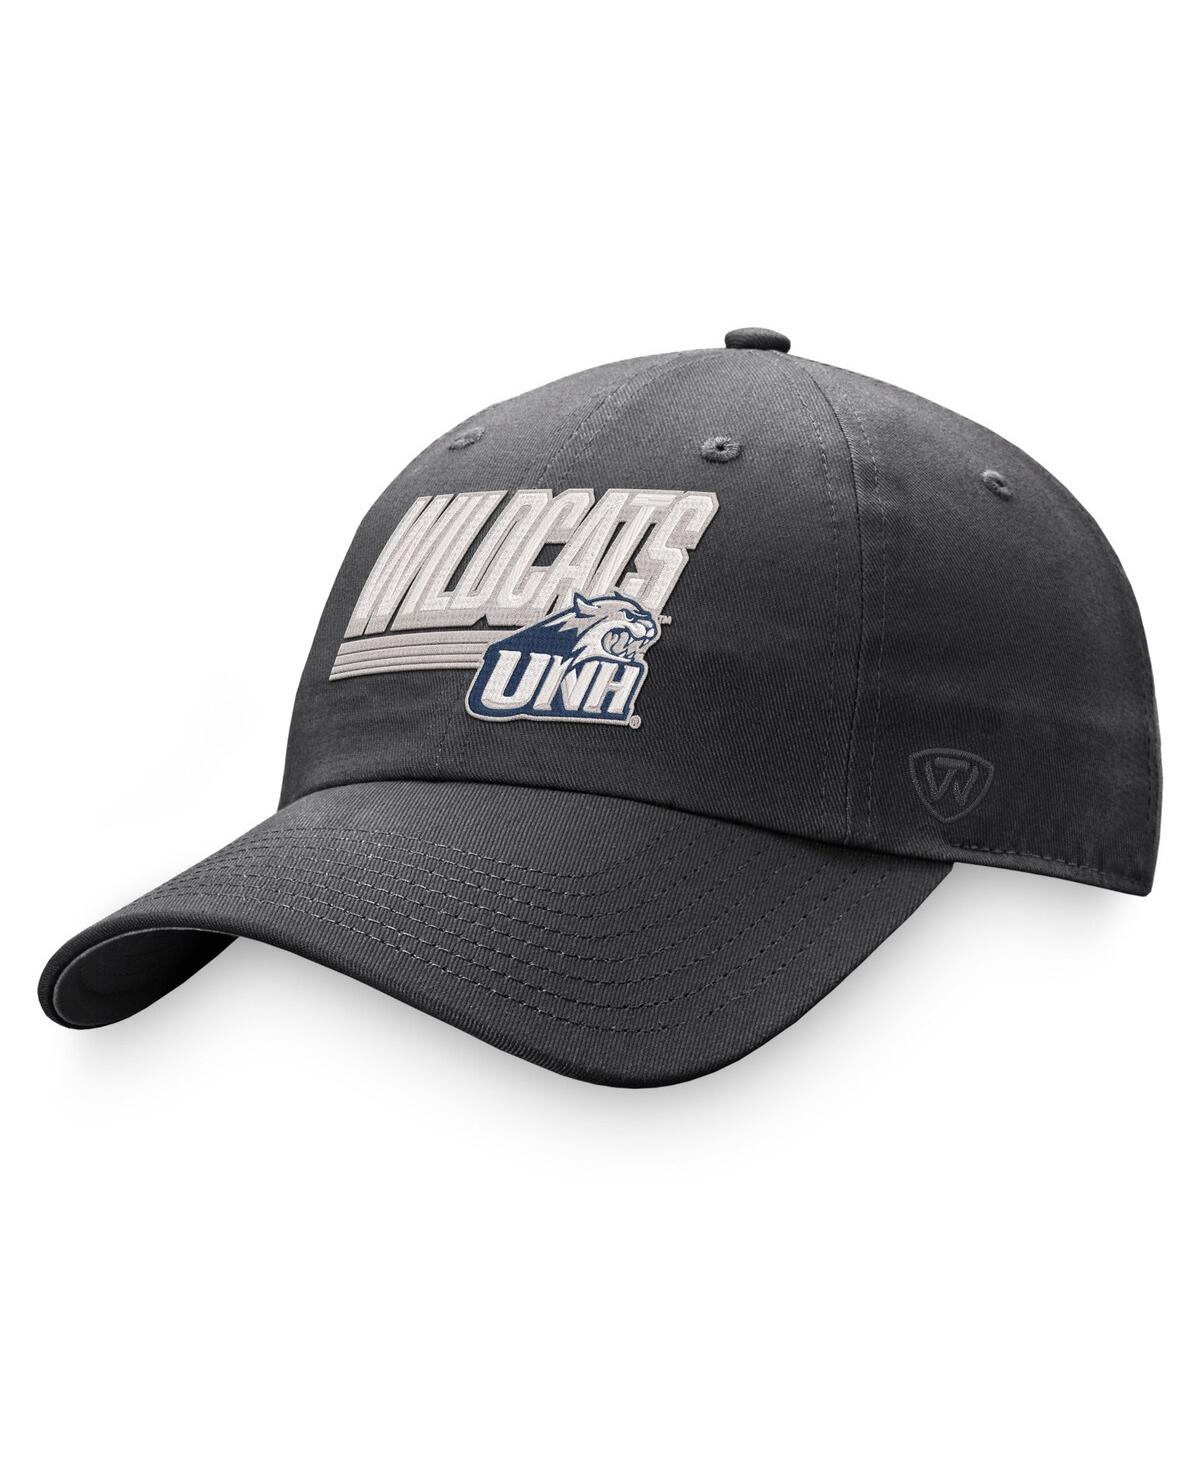 Men's Top of the World Charcoal New Hampshire Wildcats Slice Adjustable Hat - Charcoal